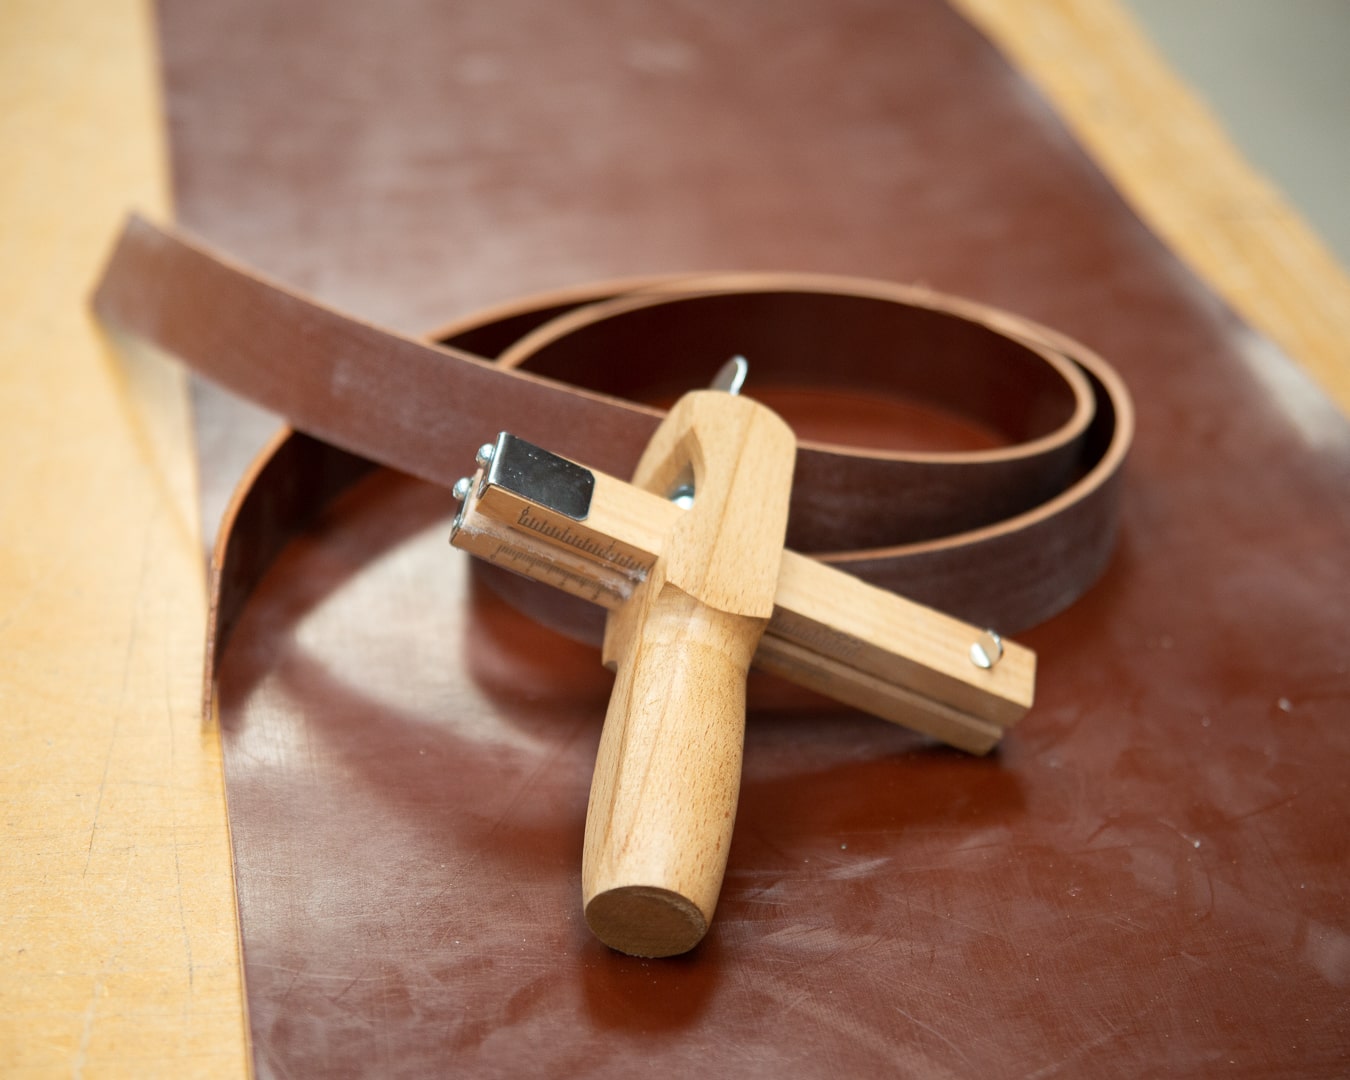 Strap cutter with leather strap